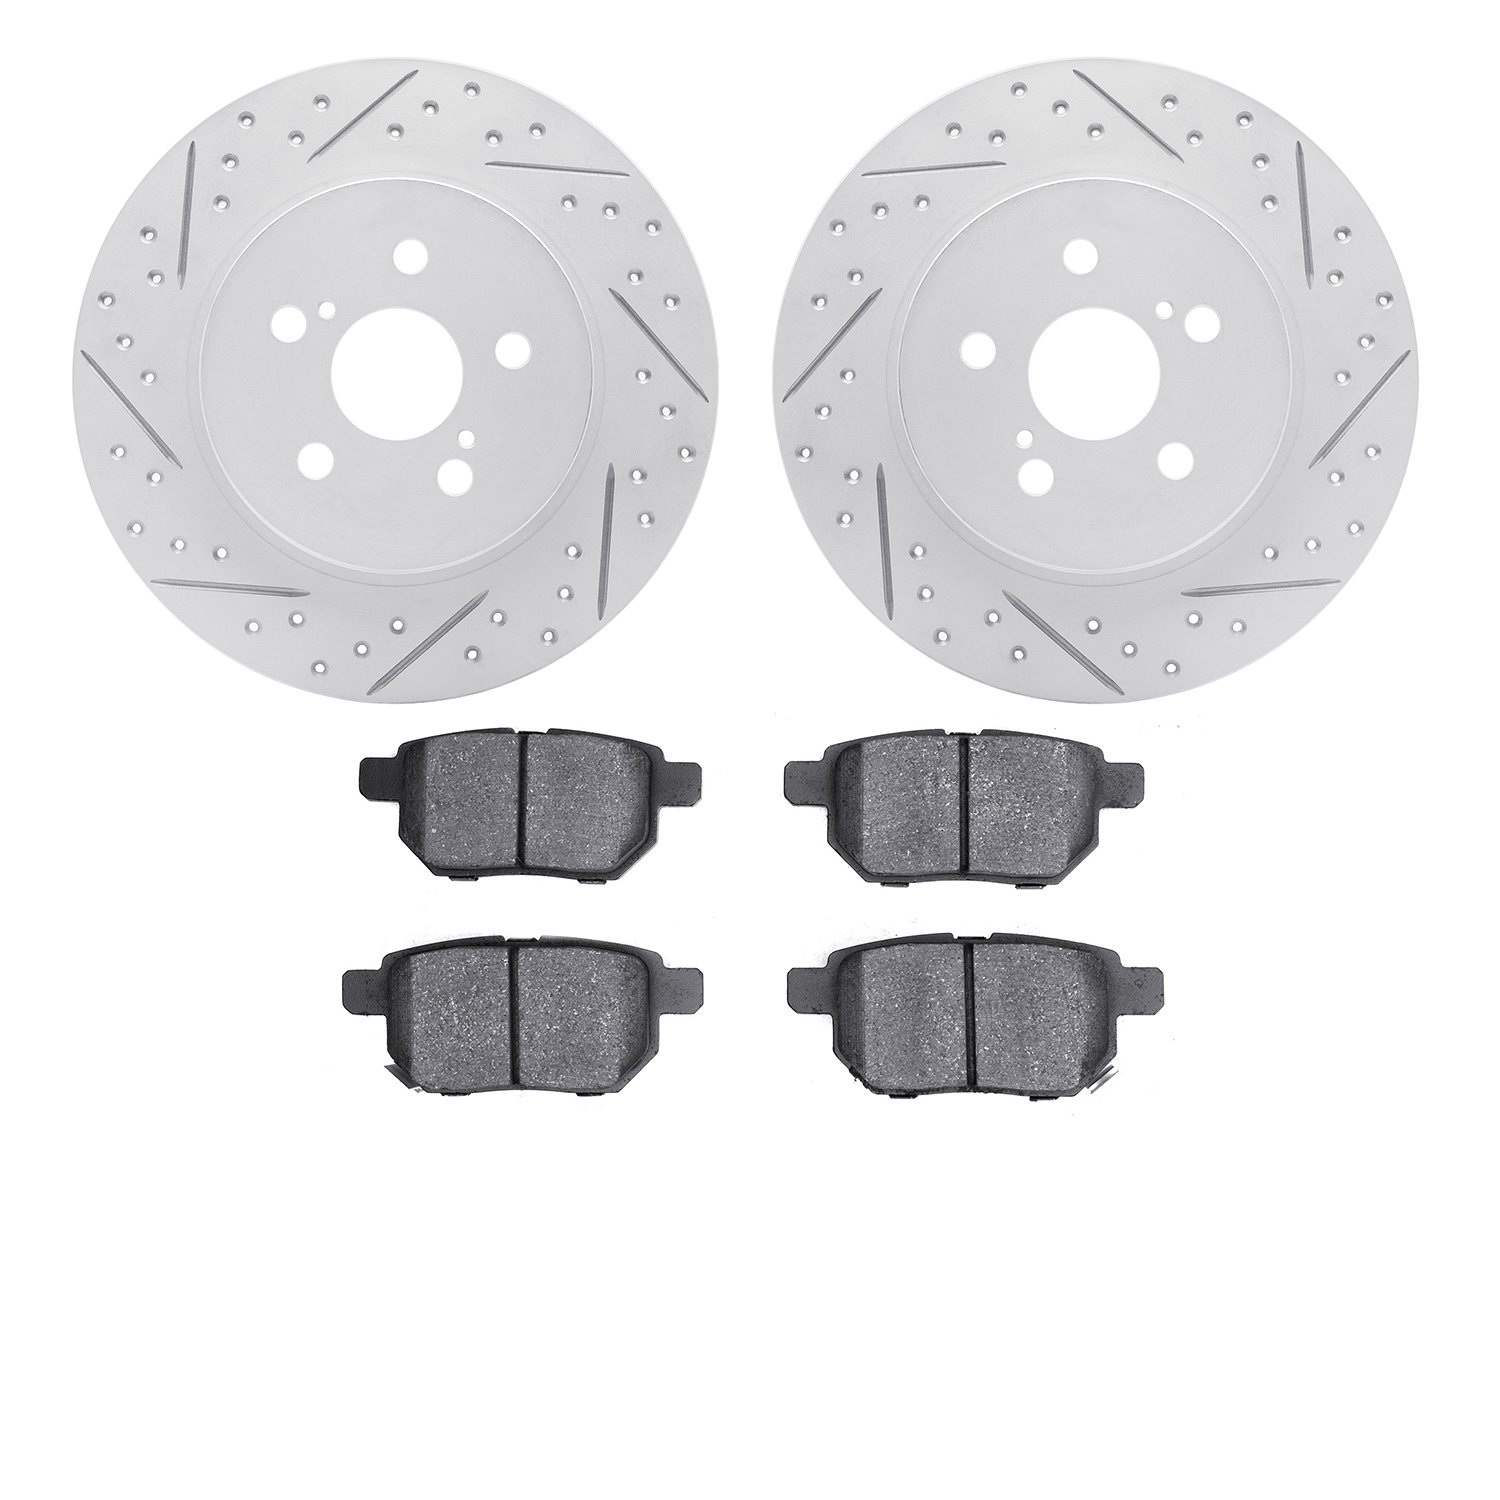 2502-75019 Geoperformance Drilled/Slotted Rotors w/5000 Advanced Brake Pads Kit, 2011-2017 Lexus/Toyota/Scion, Position: Rear